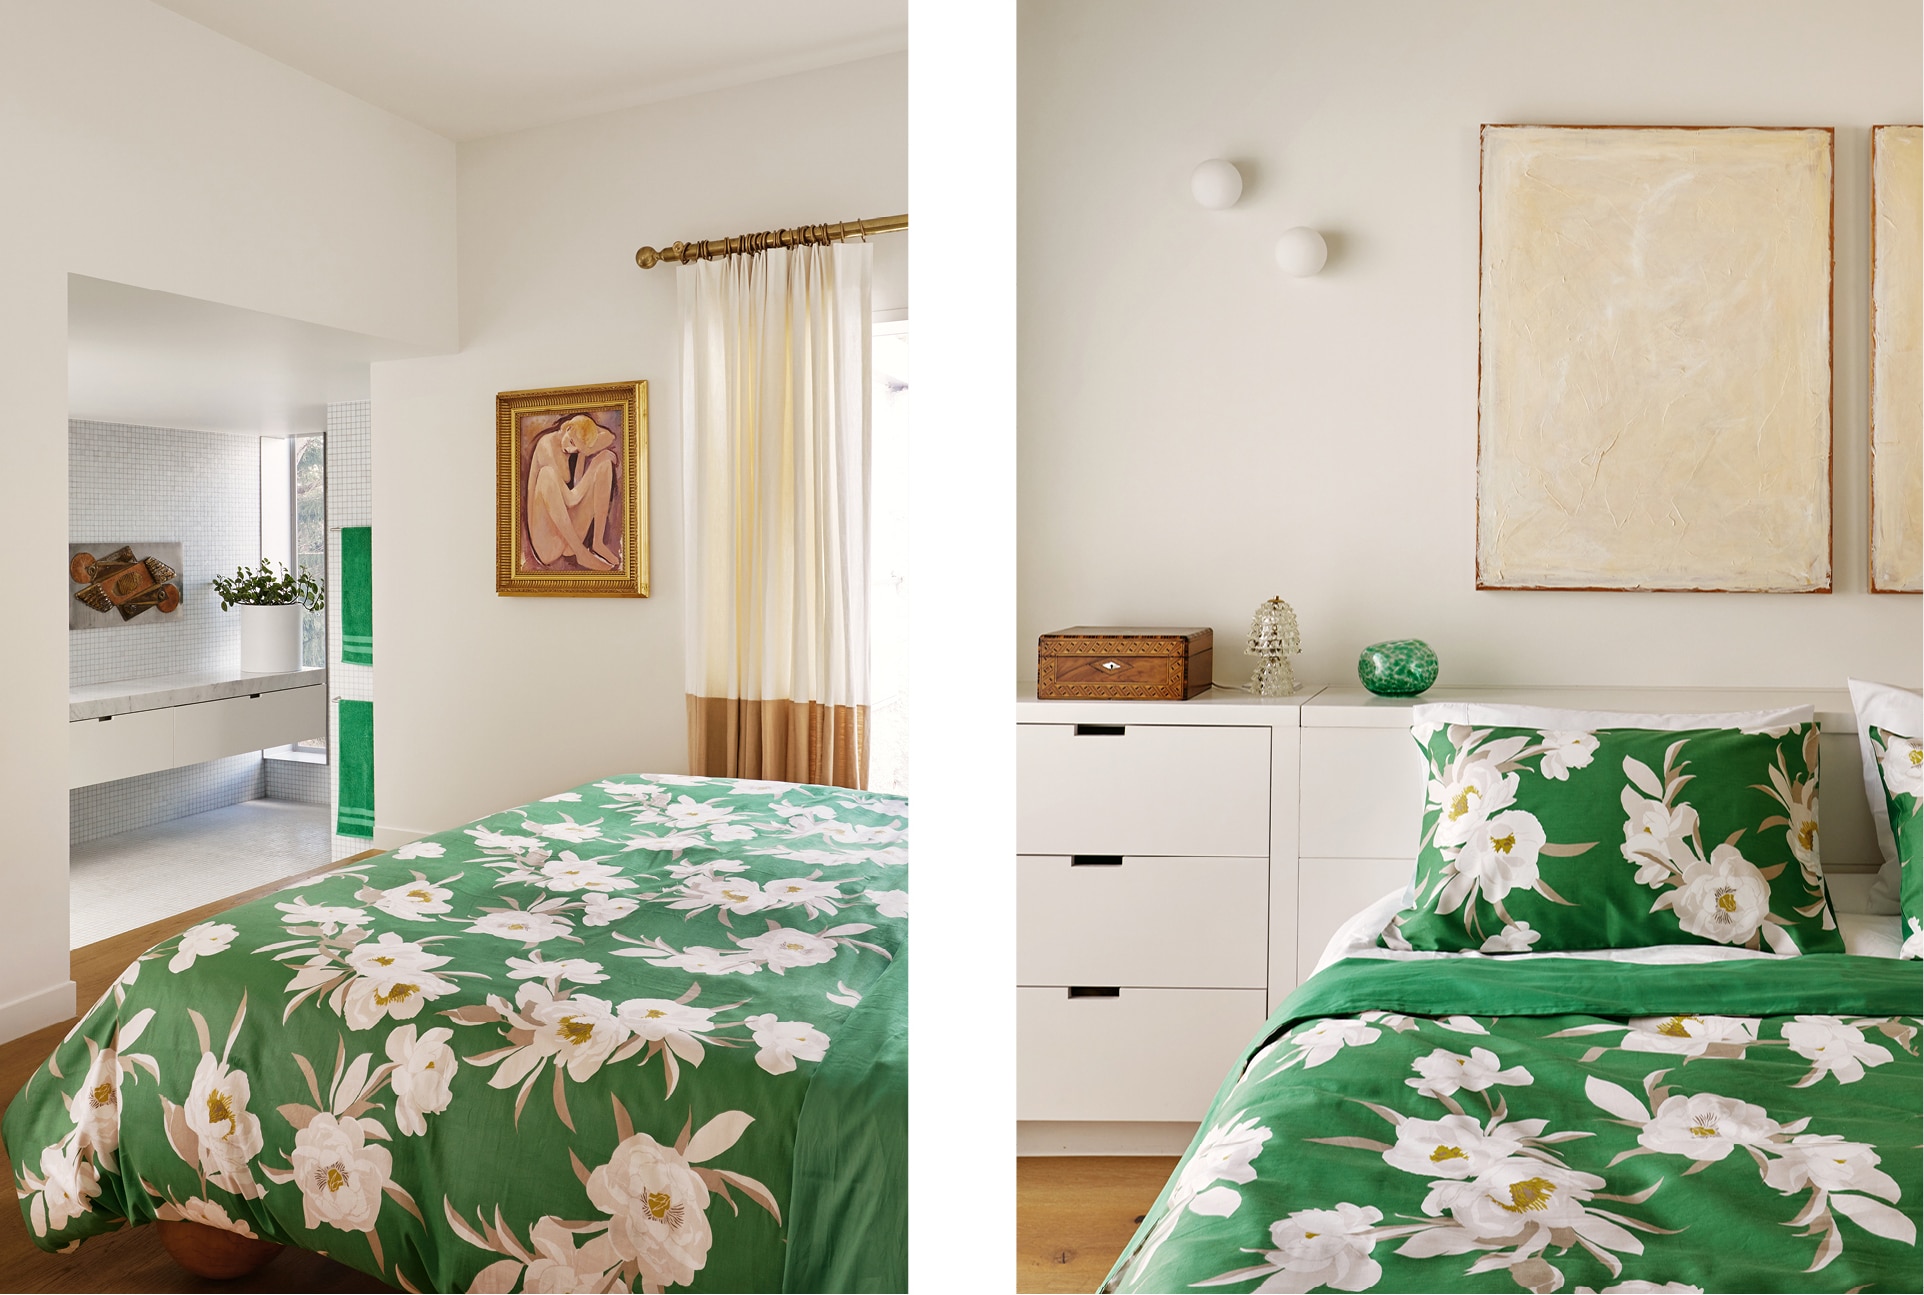 split image. left side has a shot over the bed in the master bedroom, dressed in green bedding with flowers. it looks onto the ensuite, with a peek of green towels. right side: photo taken at foot of bed, looking back at green bedding.